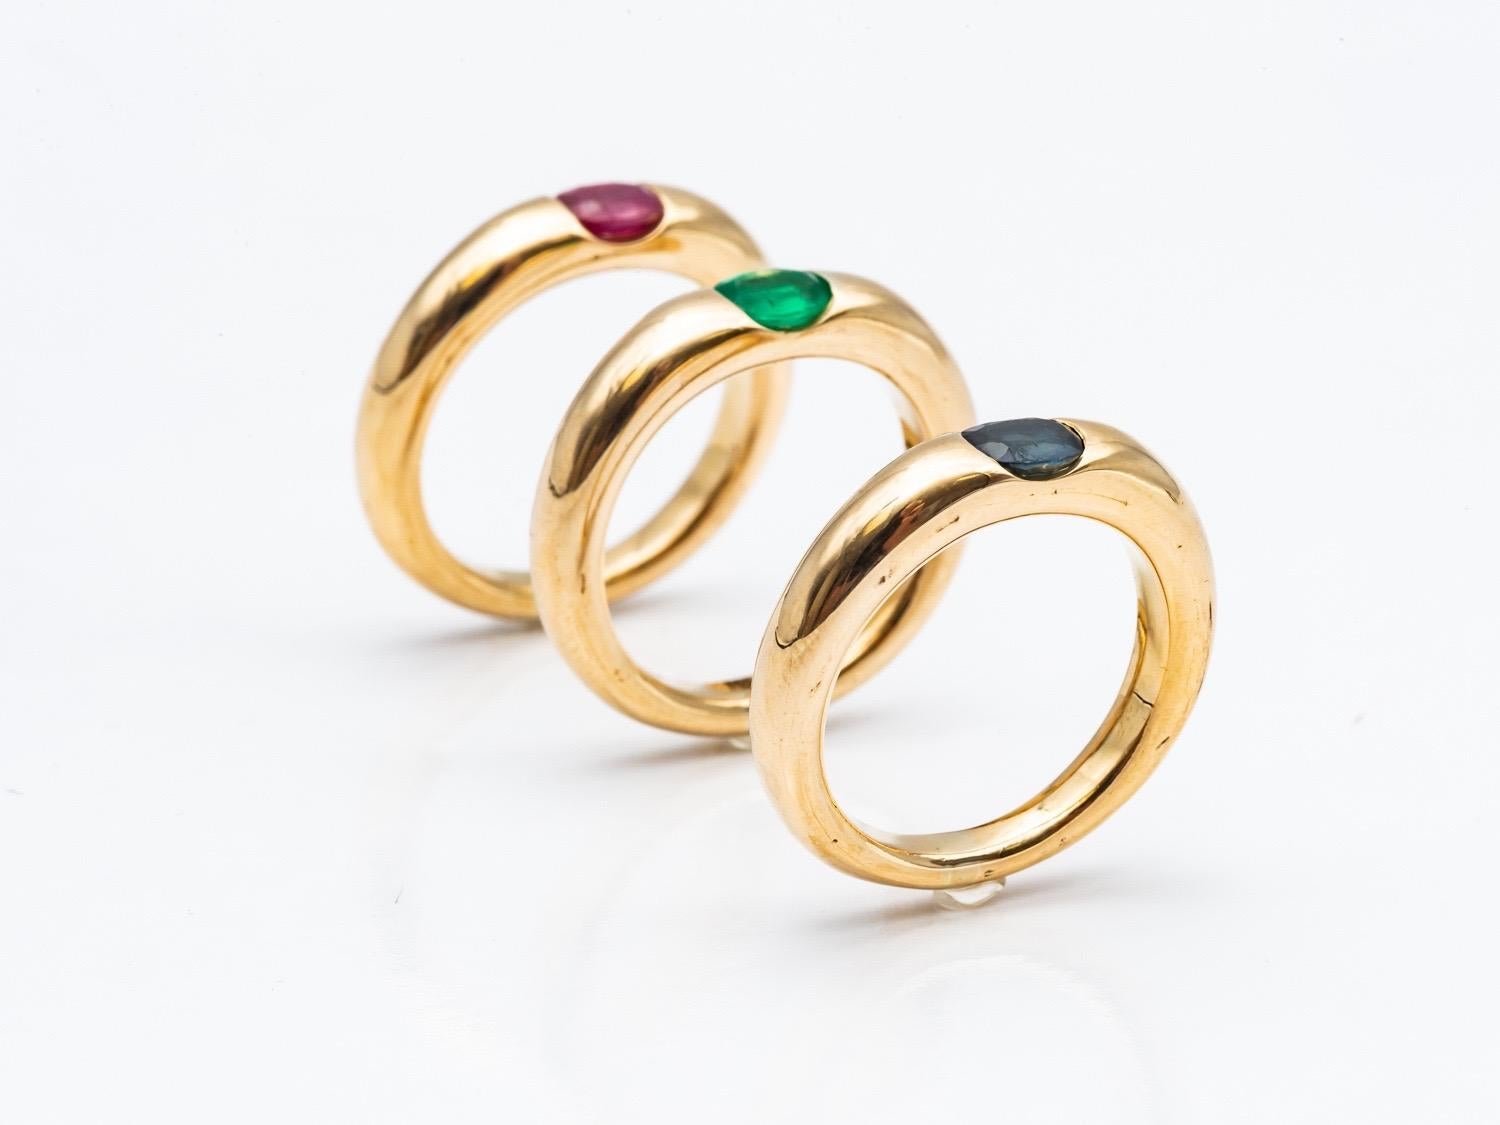 Three 18 Karat Gold Bangles Rings Set with an Emerald, a Sapphire, and a Ruby 8